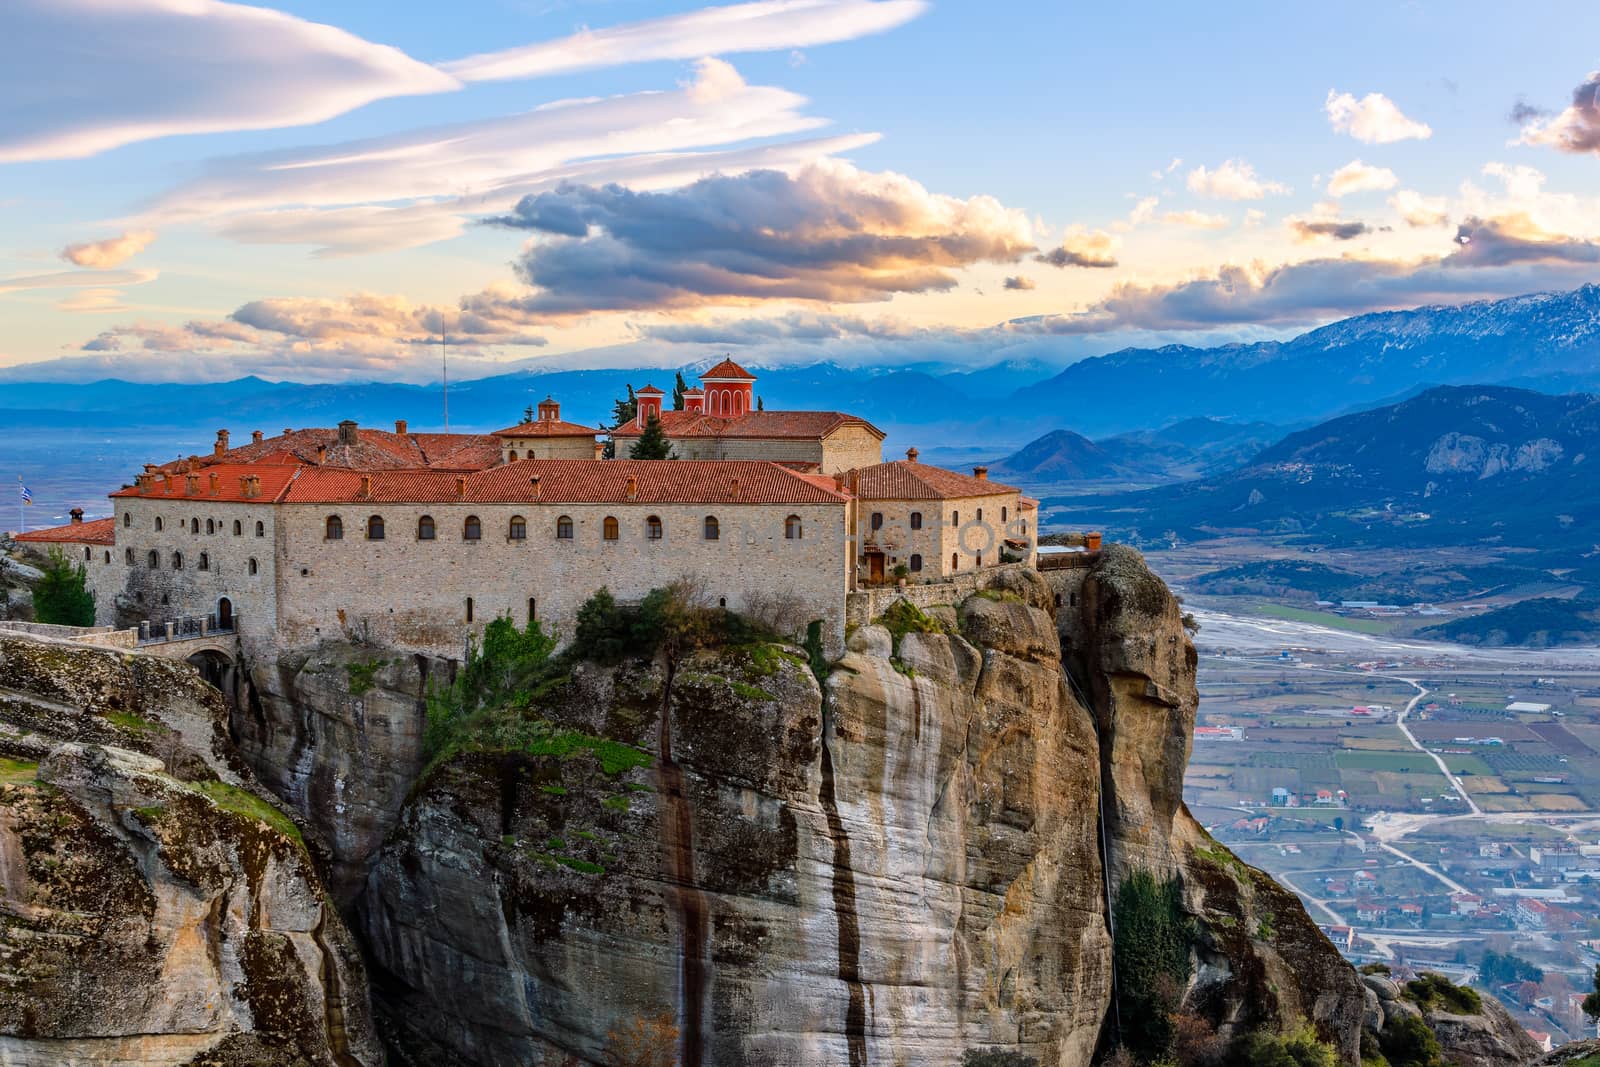 Agios Stephanos or Saint Stephen monastery located on the huge rock with mountains and town landscape in the background, Meteors, Trikala, Thessaly, Greece